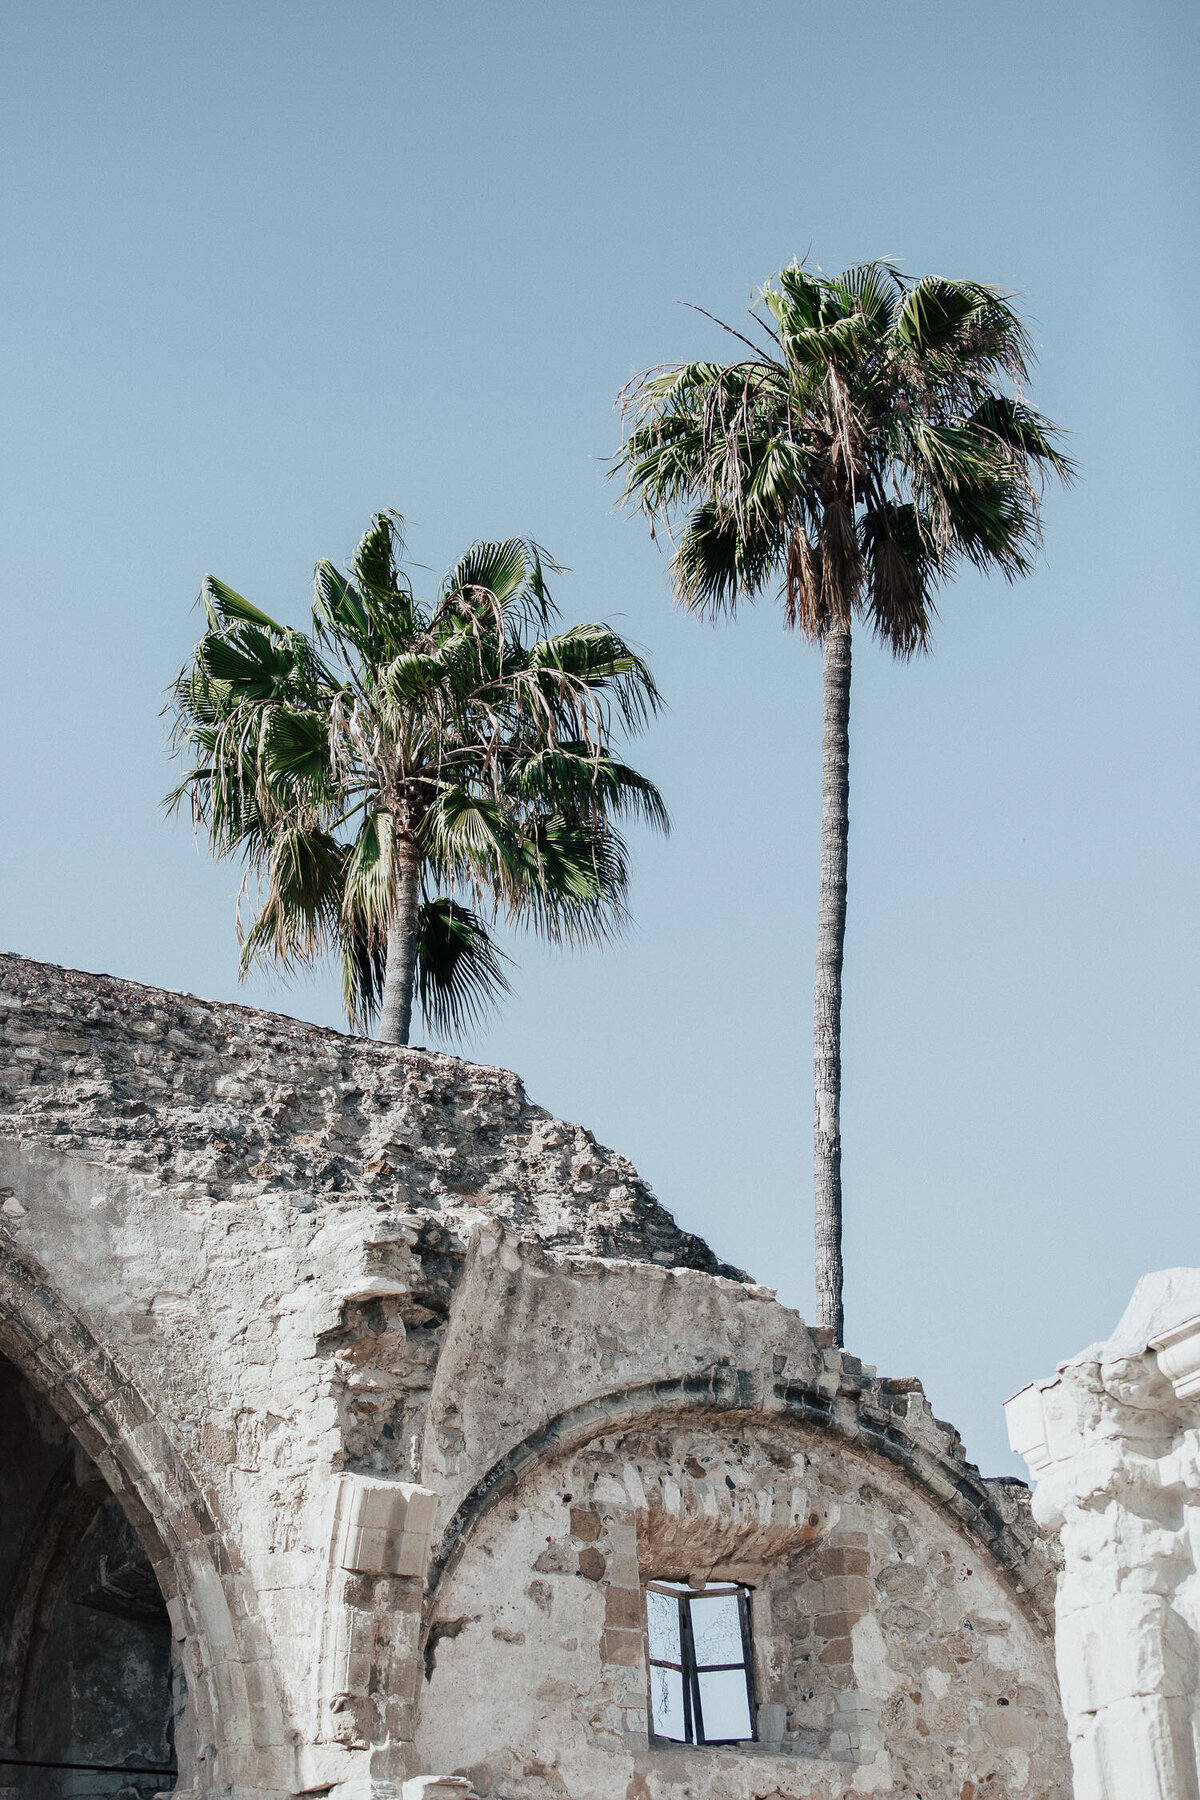 Palm trees and ruins in front of blue sky